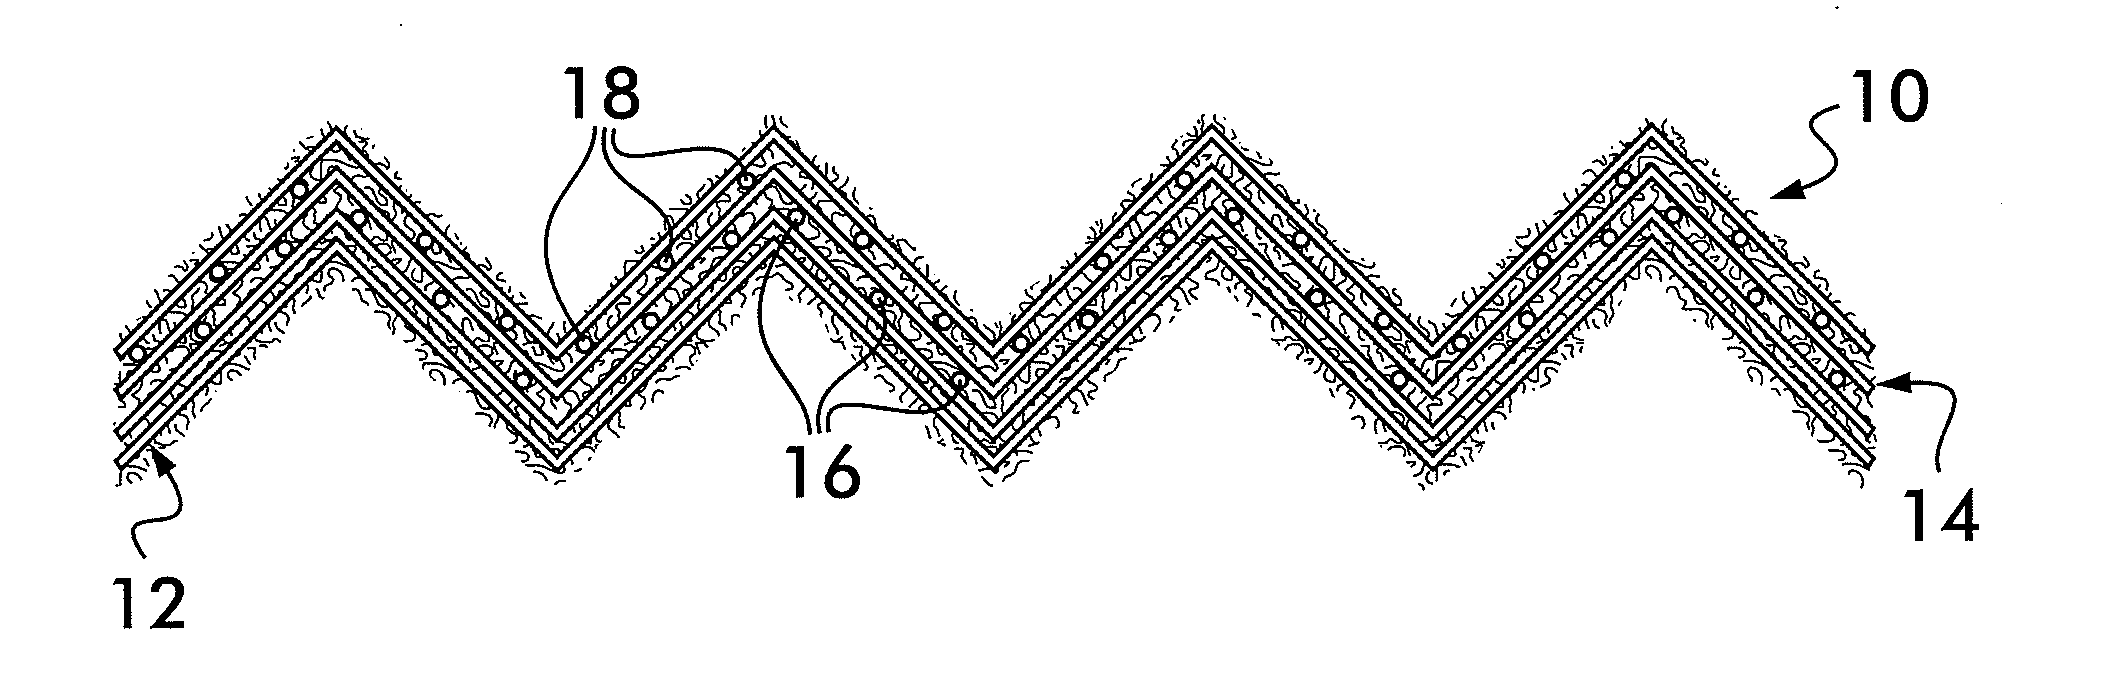 Reinforced, pleated filter structure